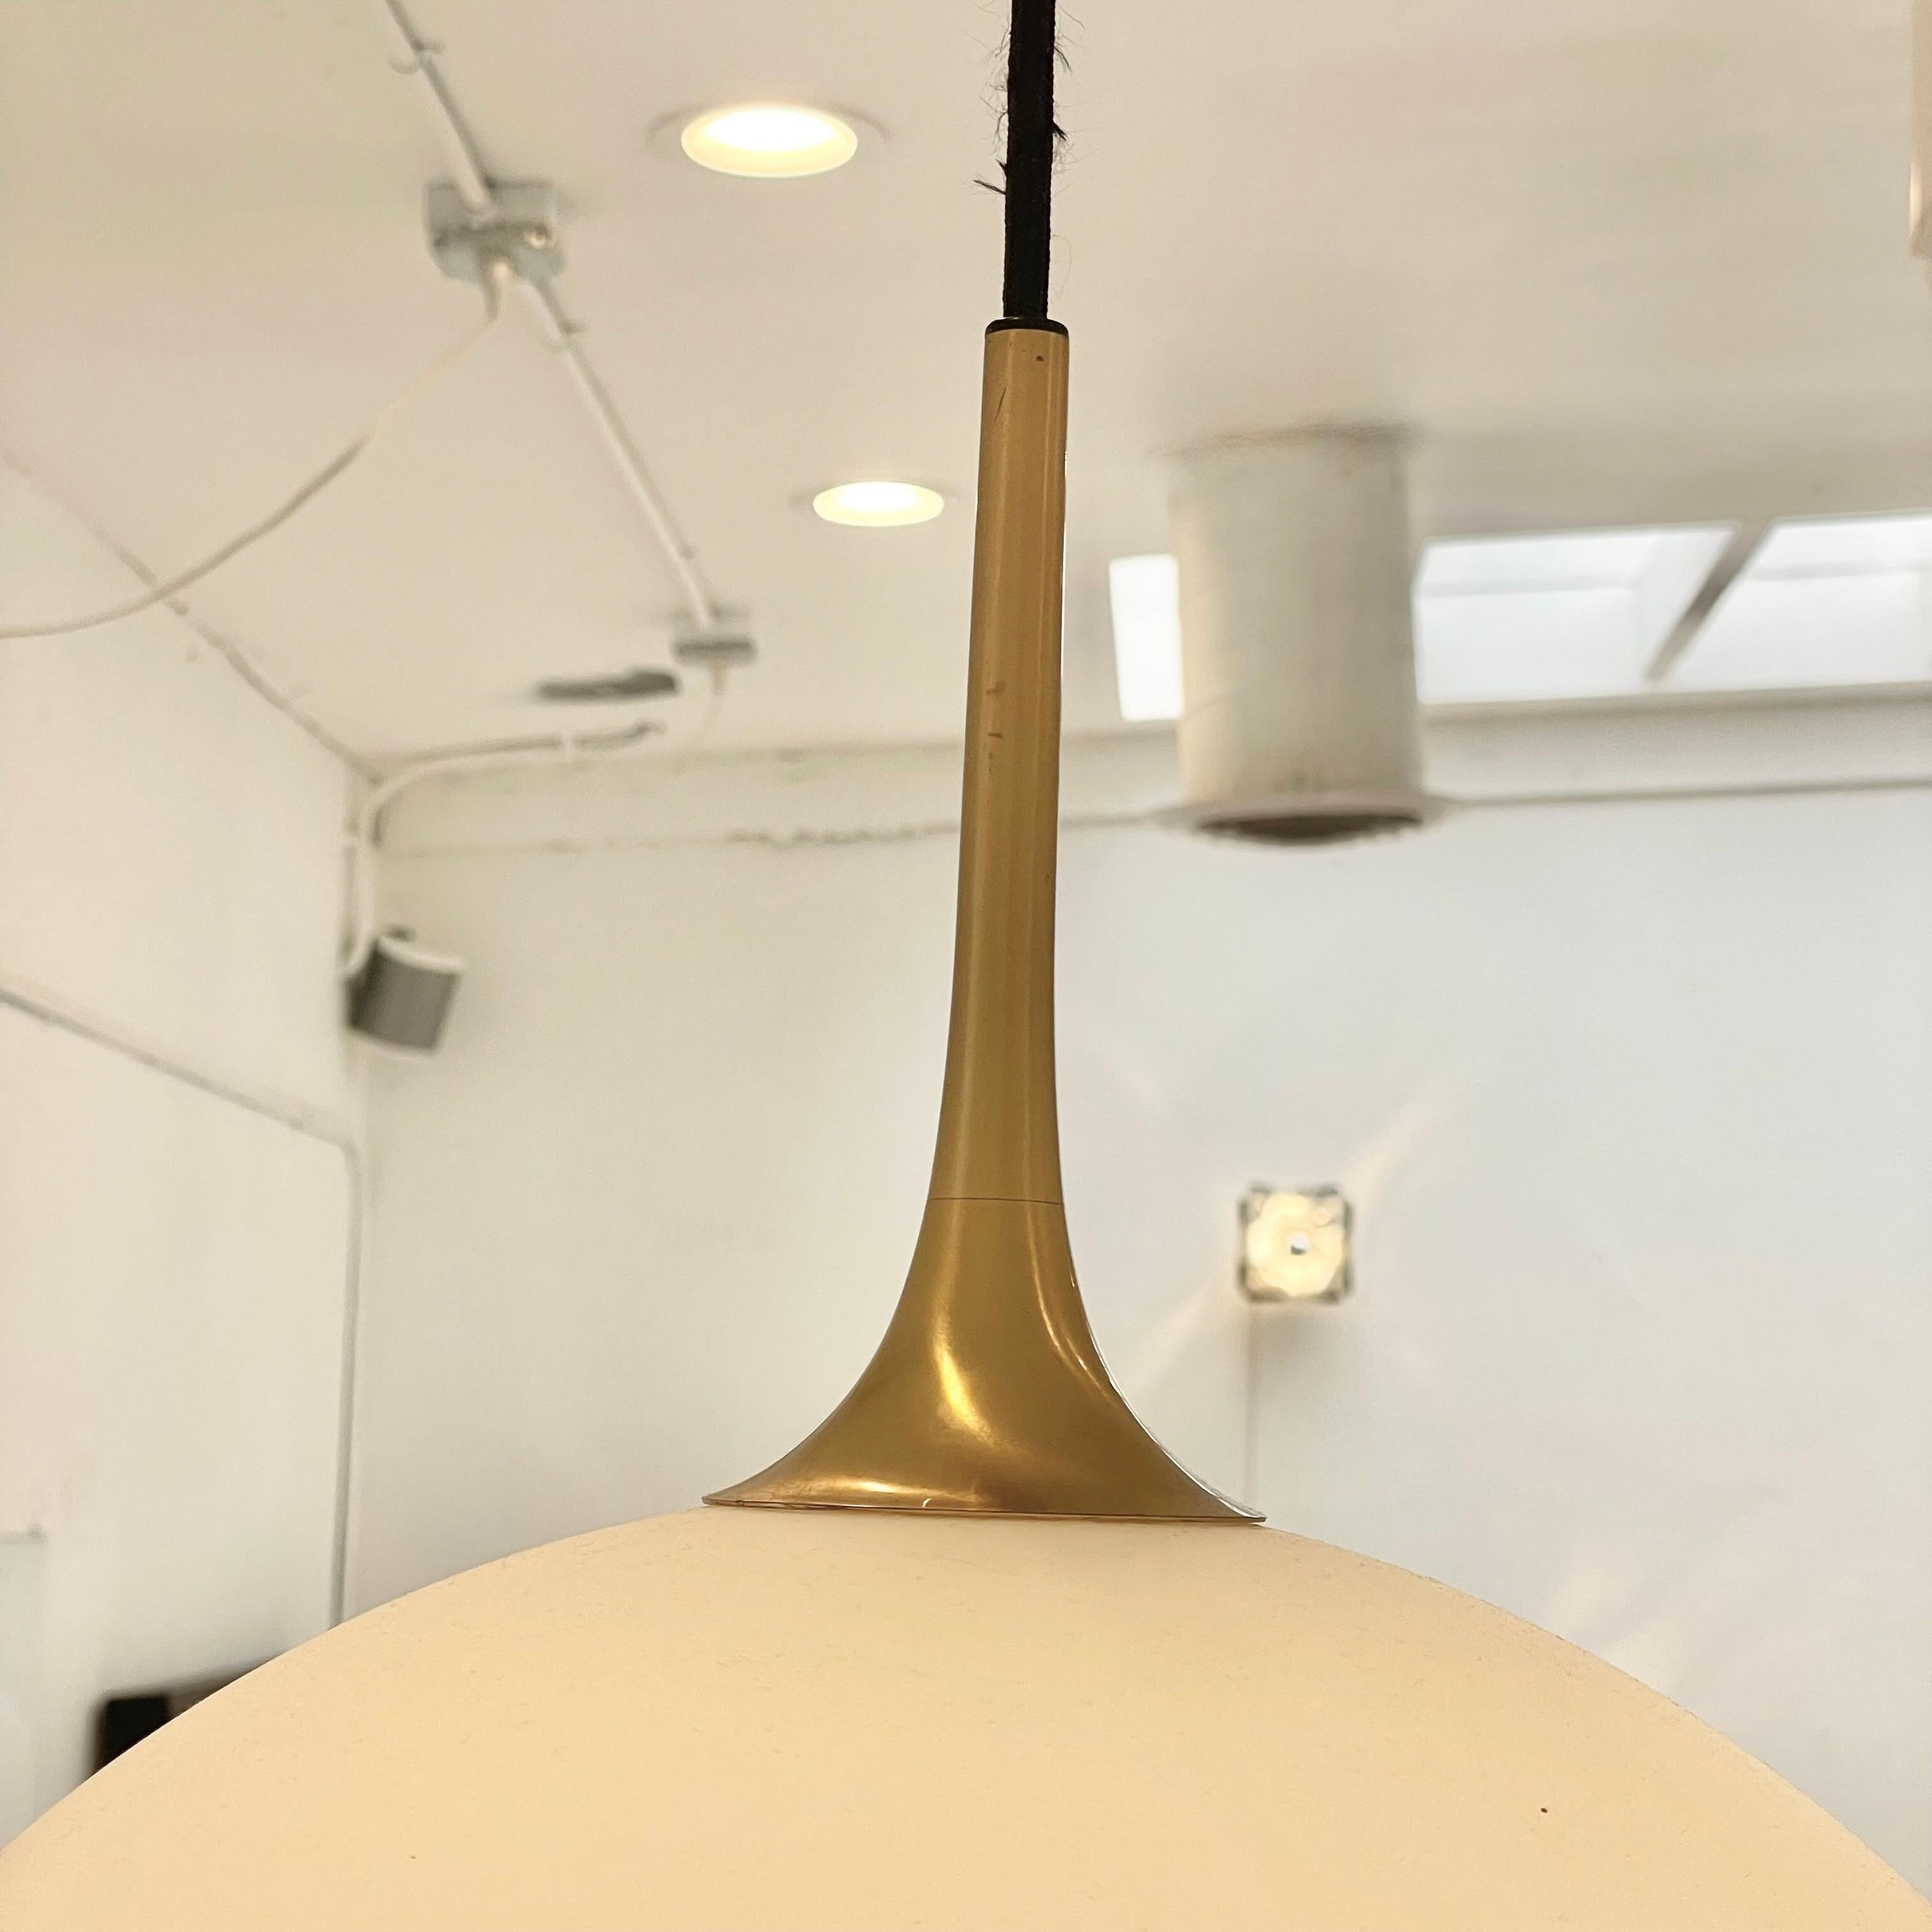 Brass Florian Schulz Counter Balance Pendant with Frosted Glass Shade, 1970s Germany For Sale